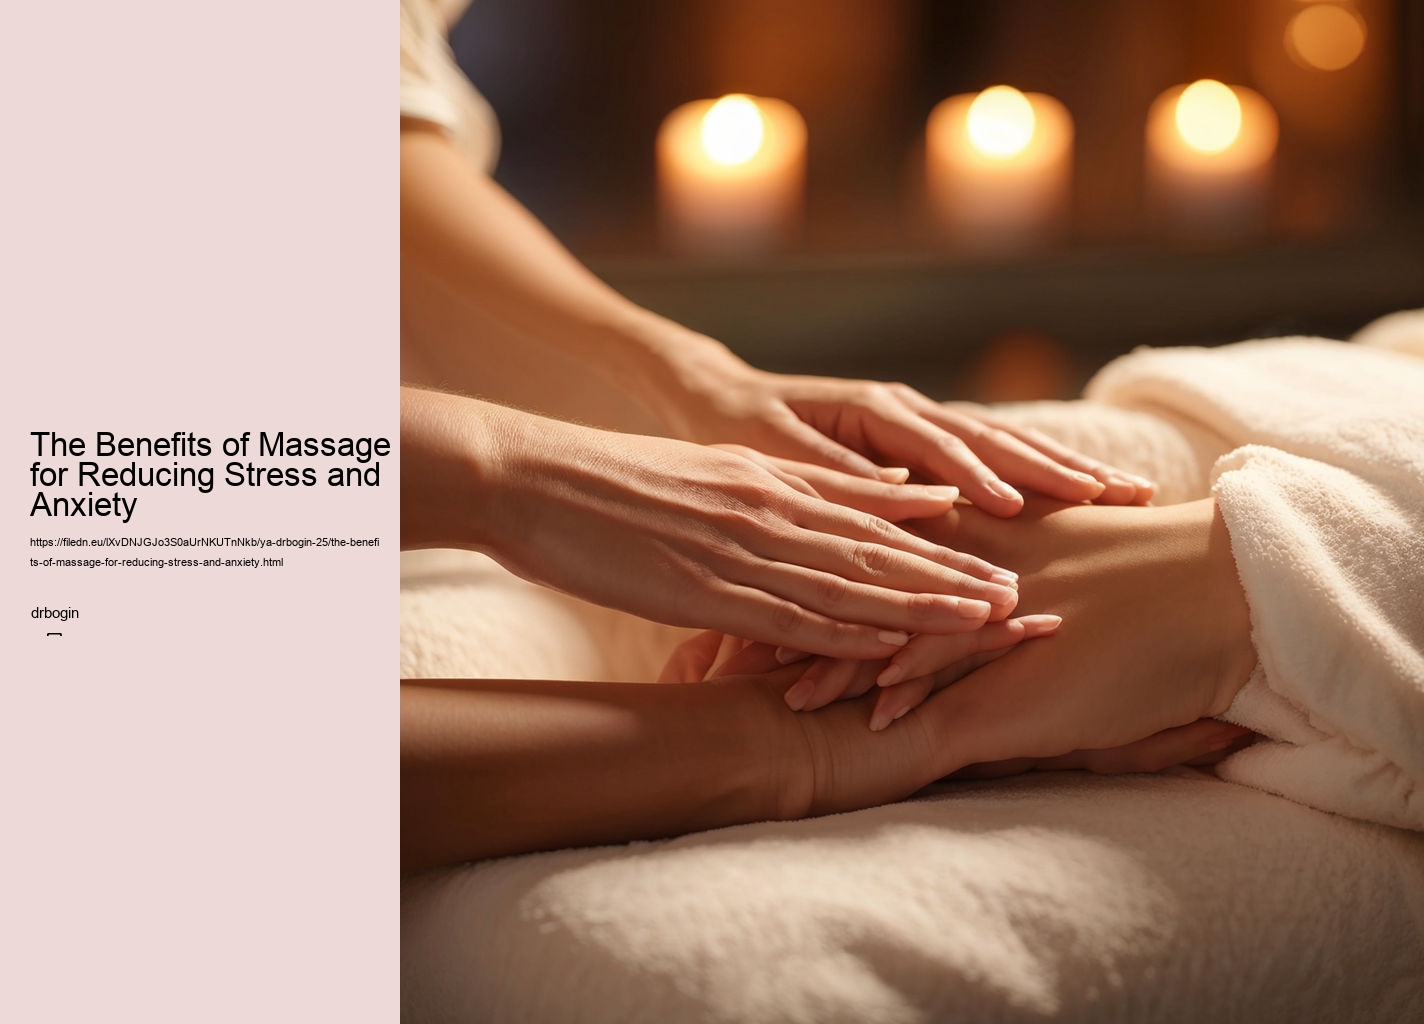 The Benefits of Massage for Reducing Stress and Anxiety